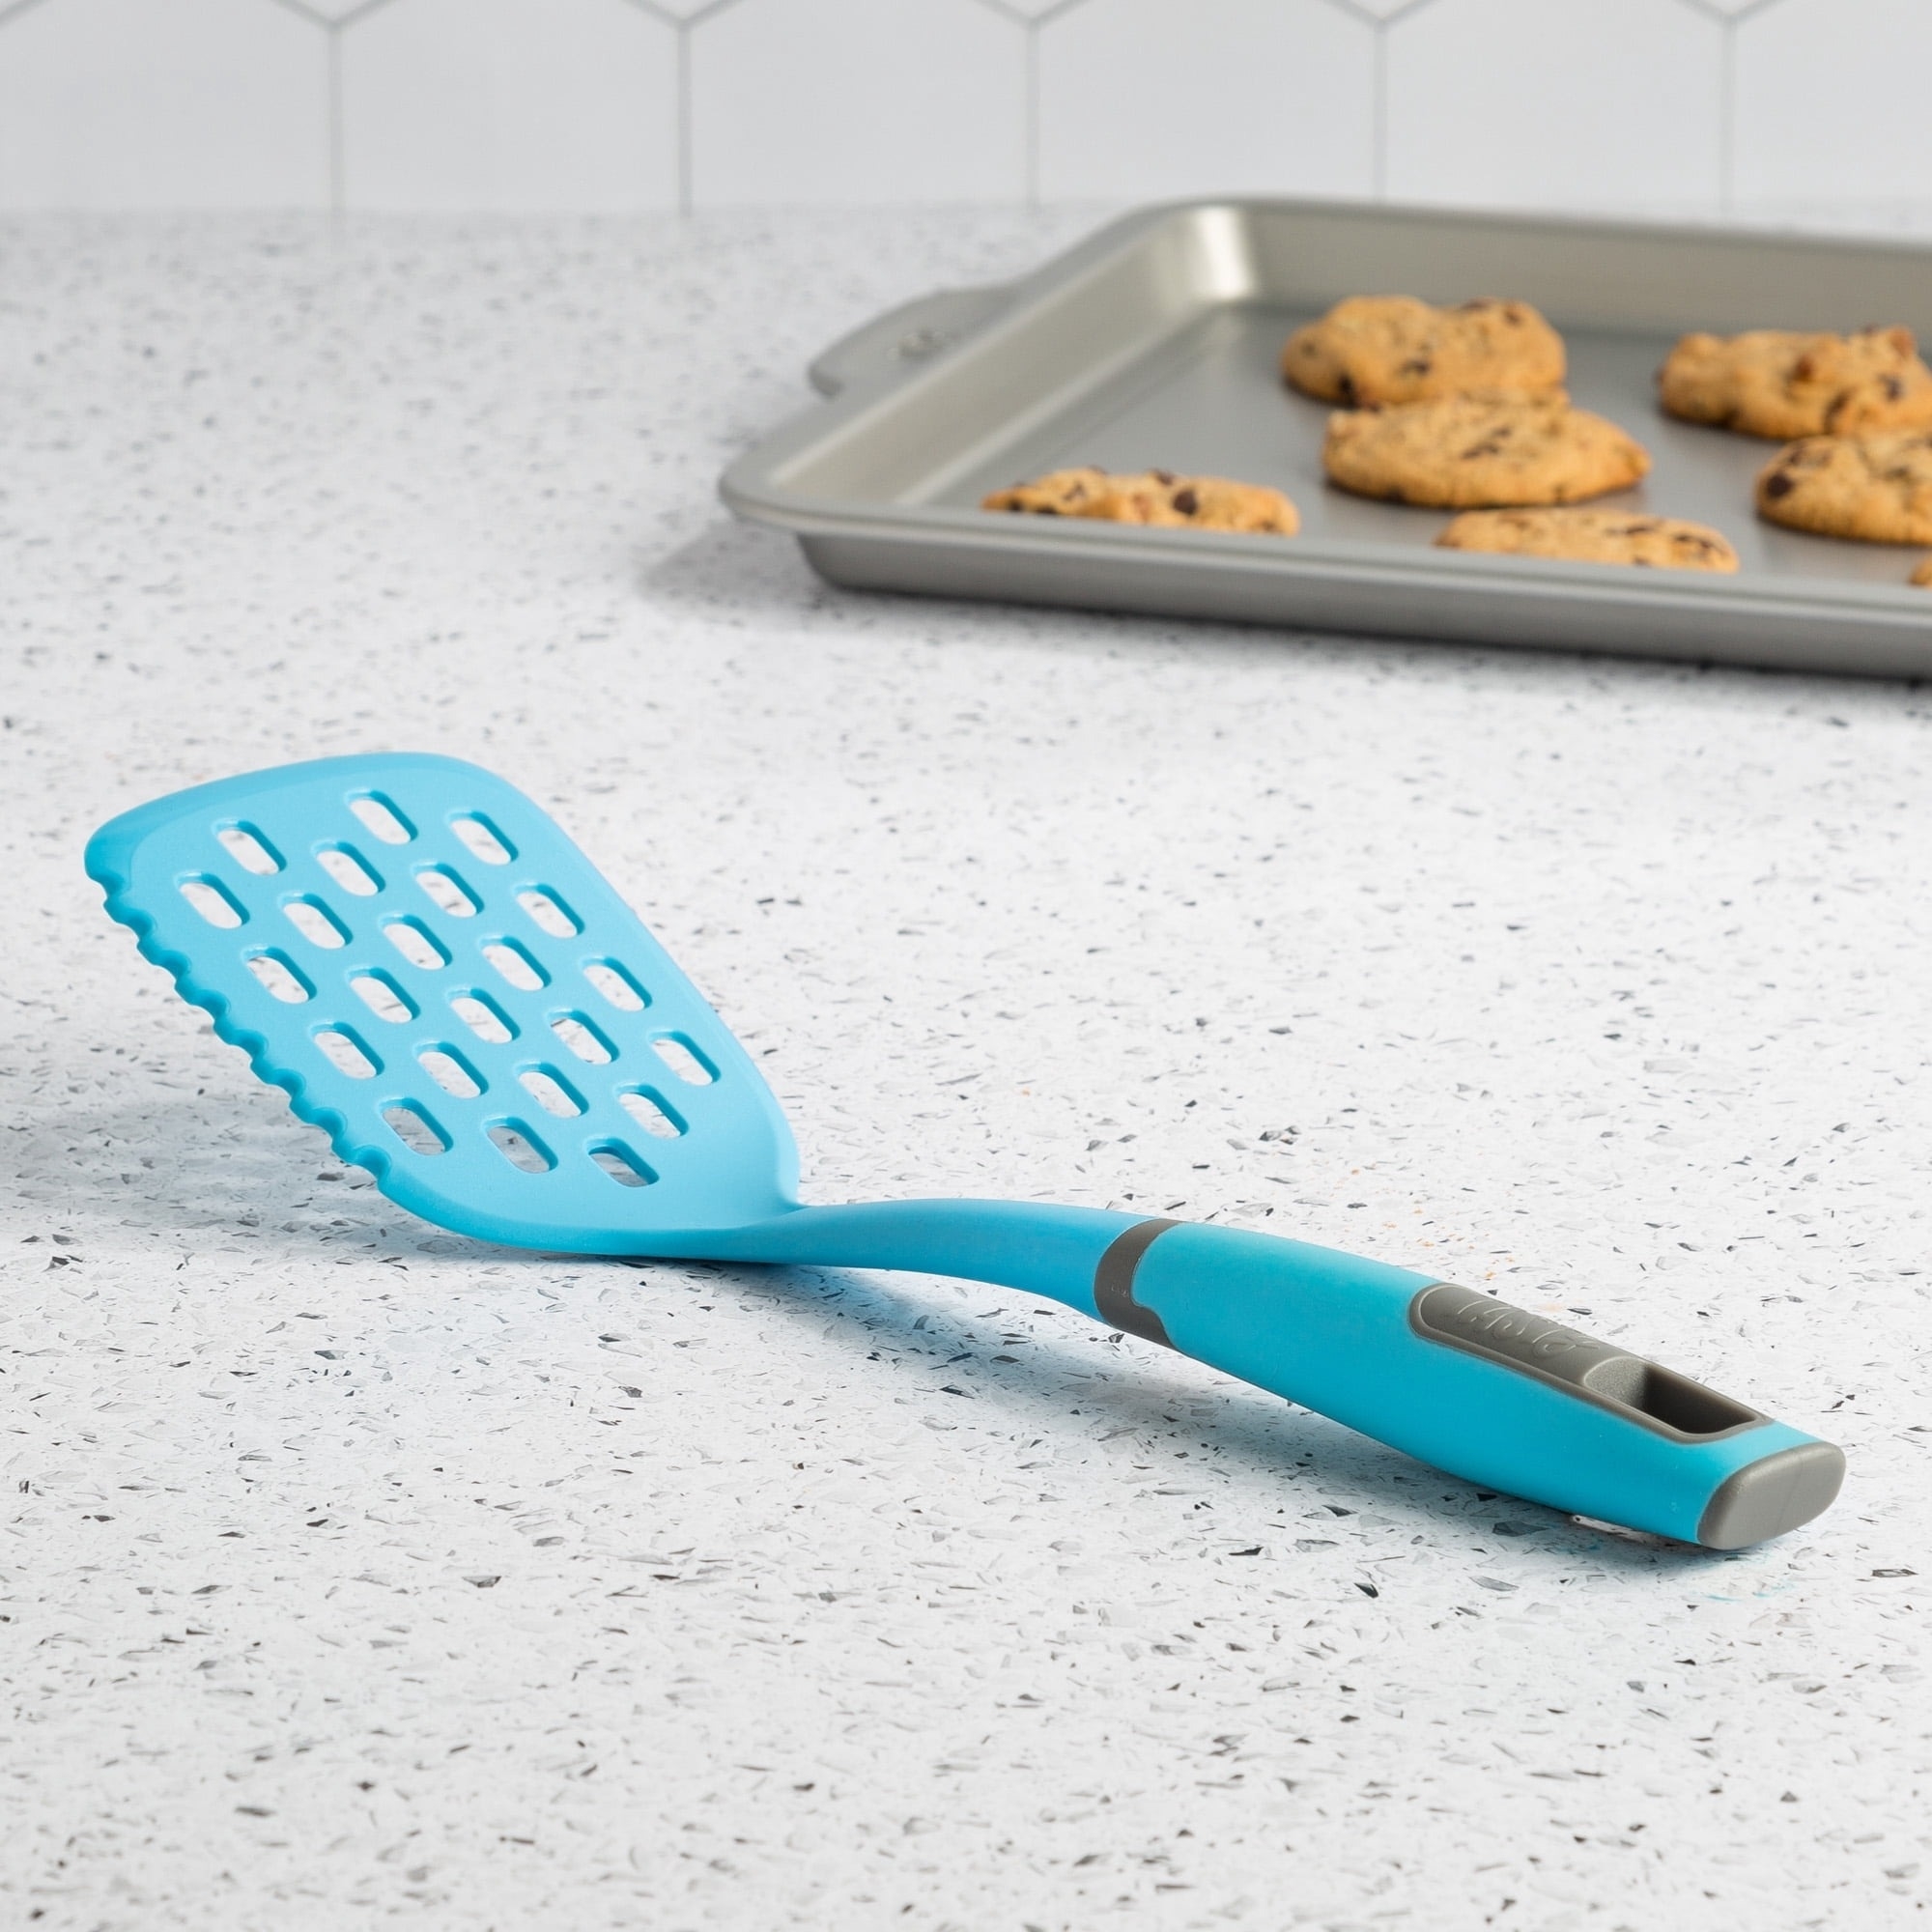 A blue slotted turner on a counter with cookies.